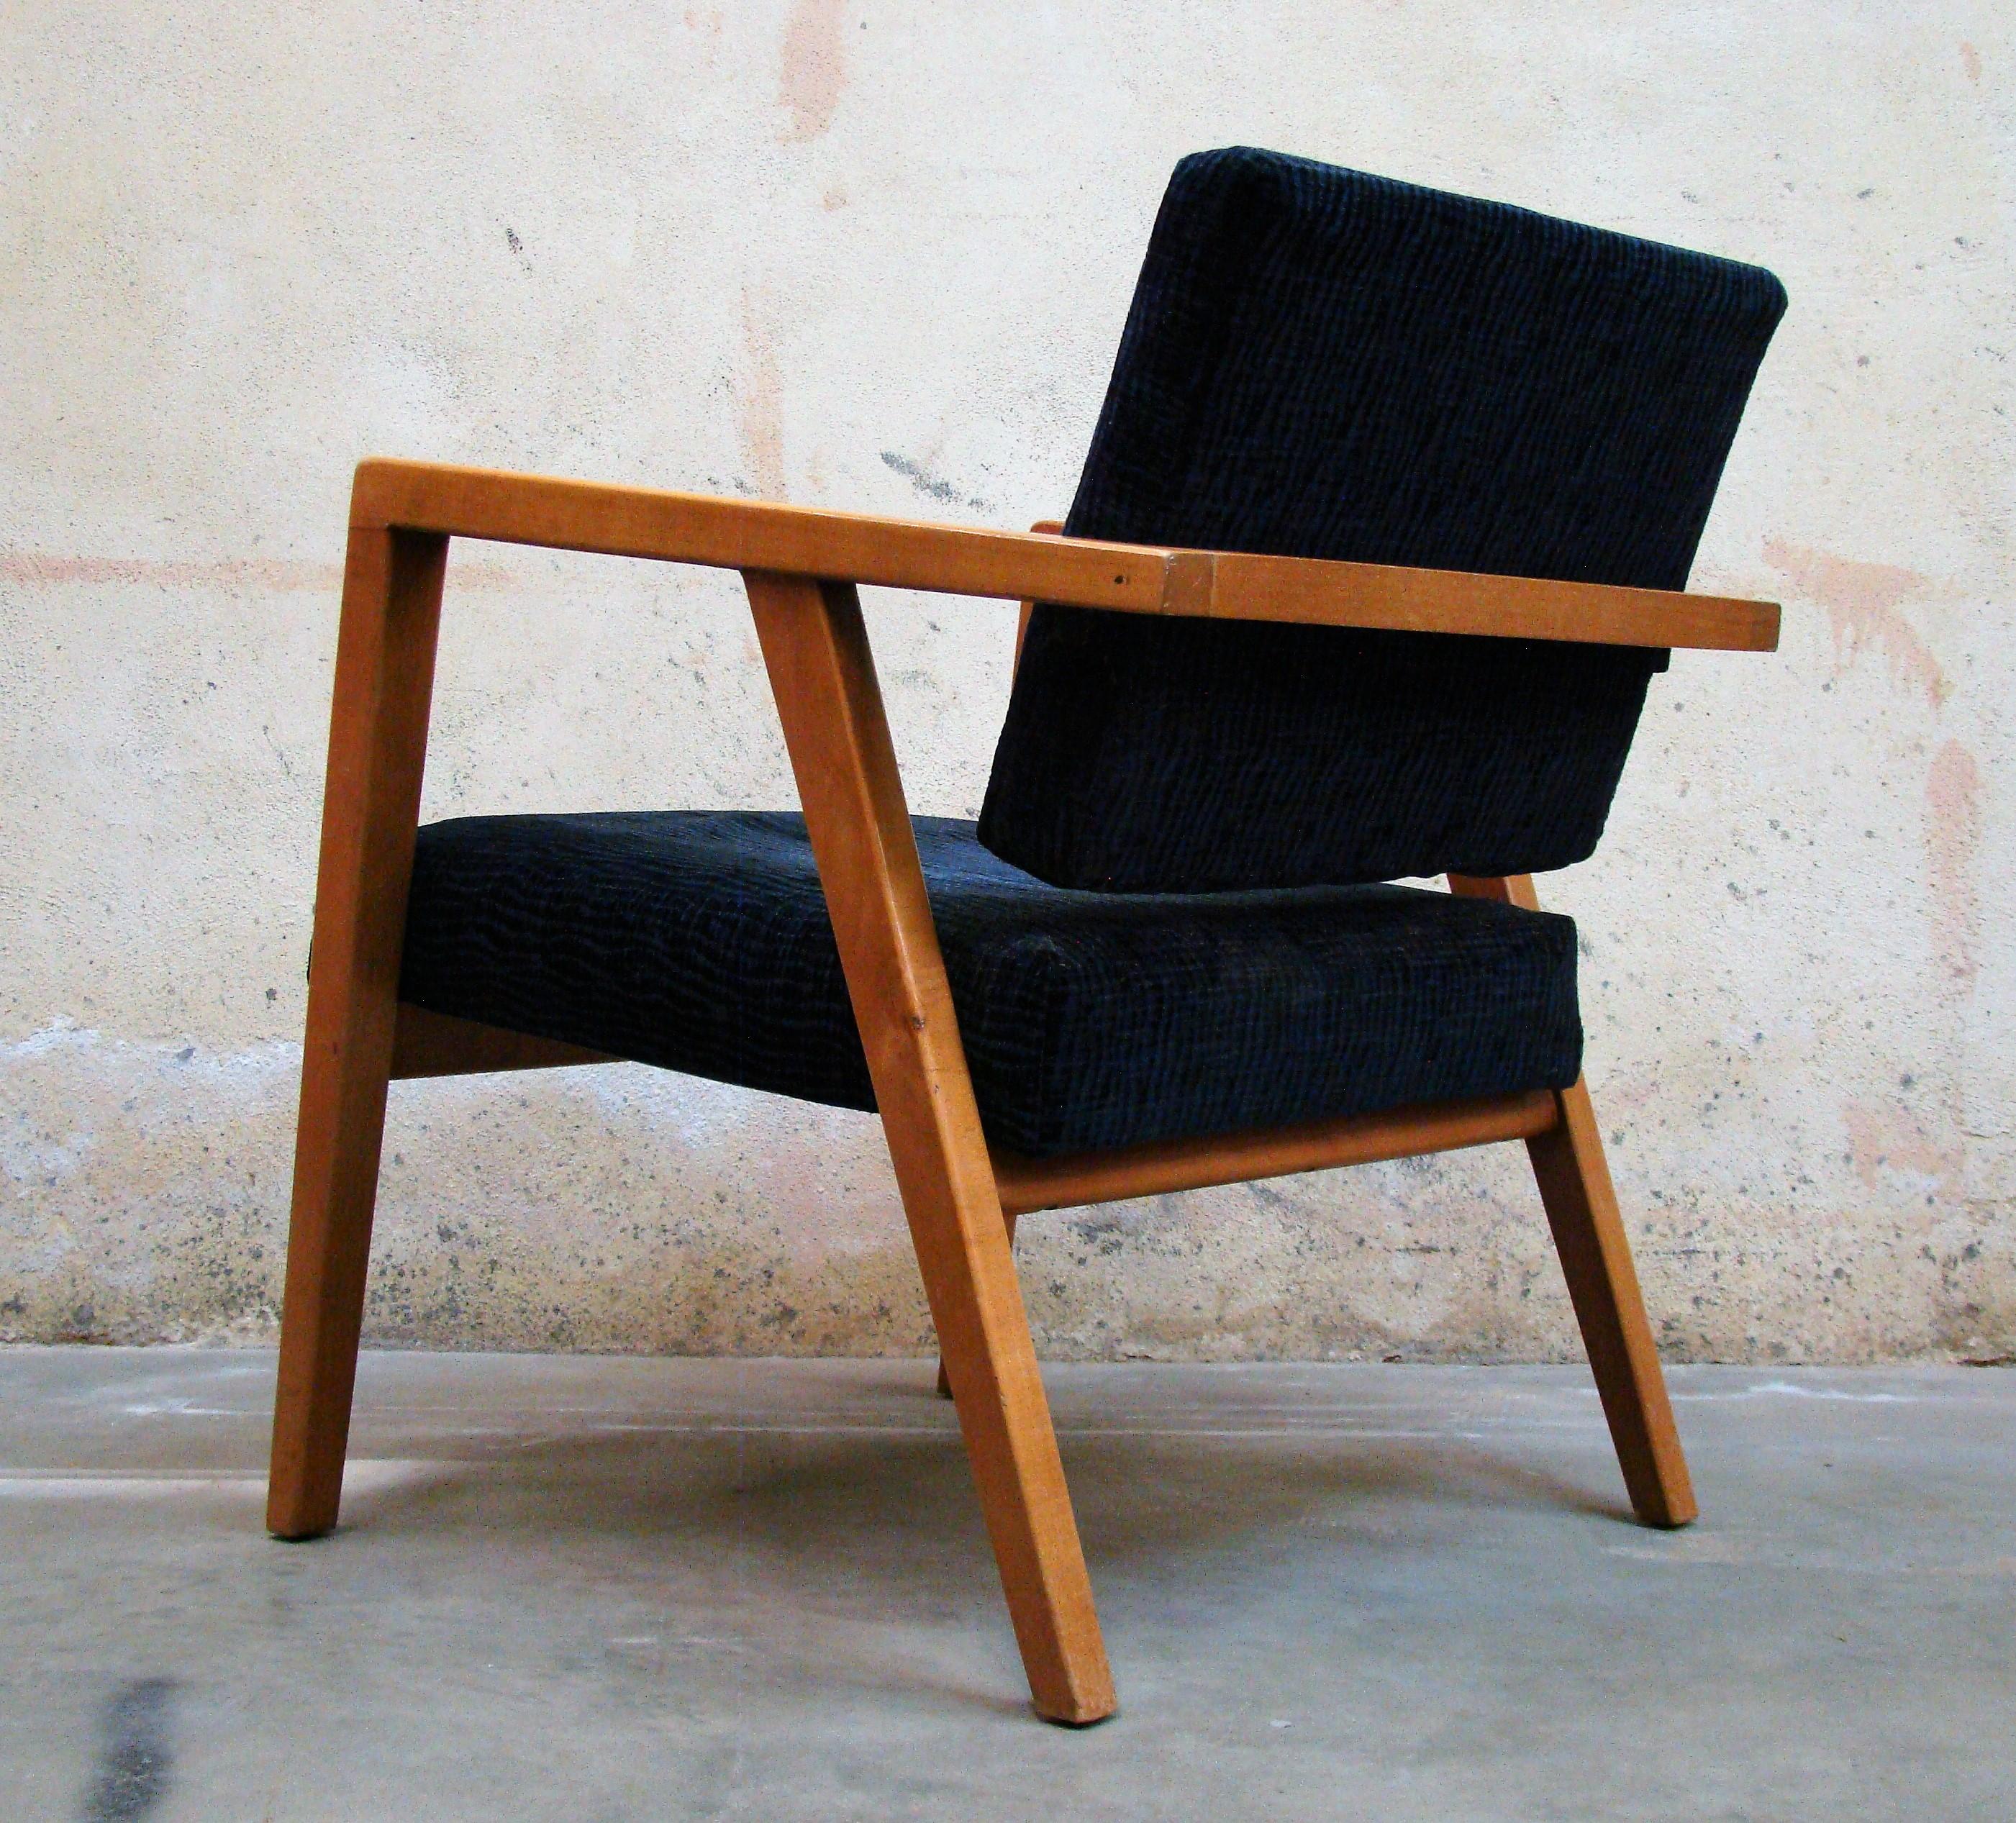 Mid-20th Century Lounge Chair by Franco Albini for Knoll, circa 1952